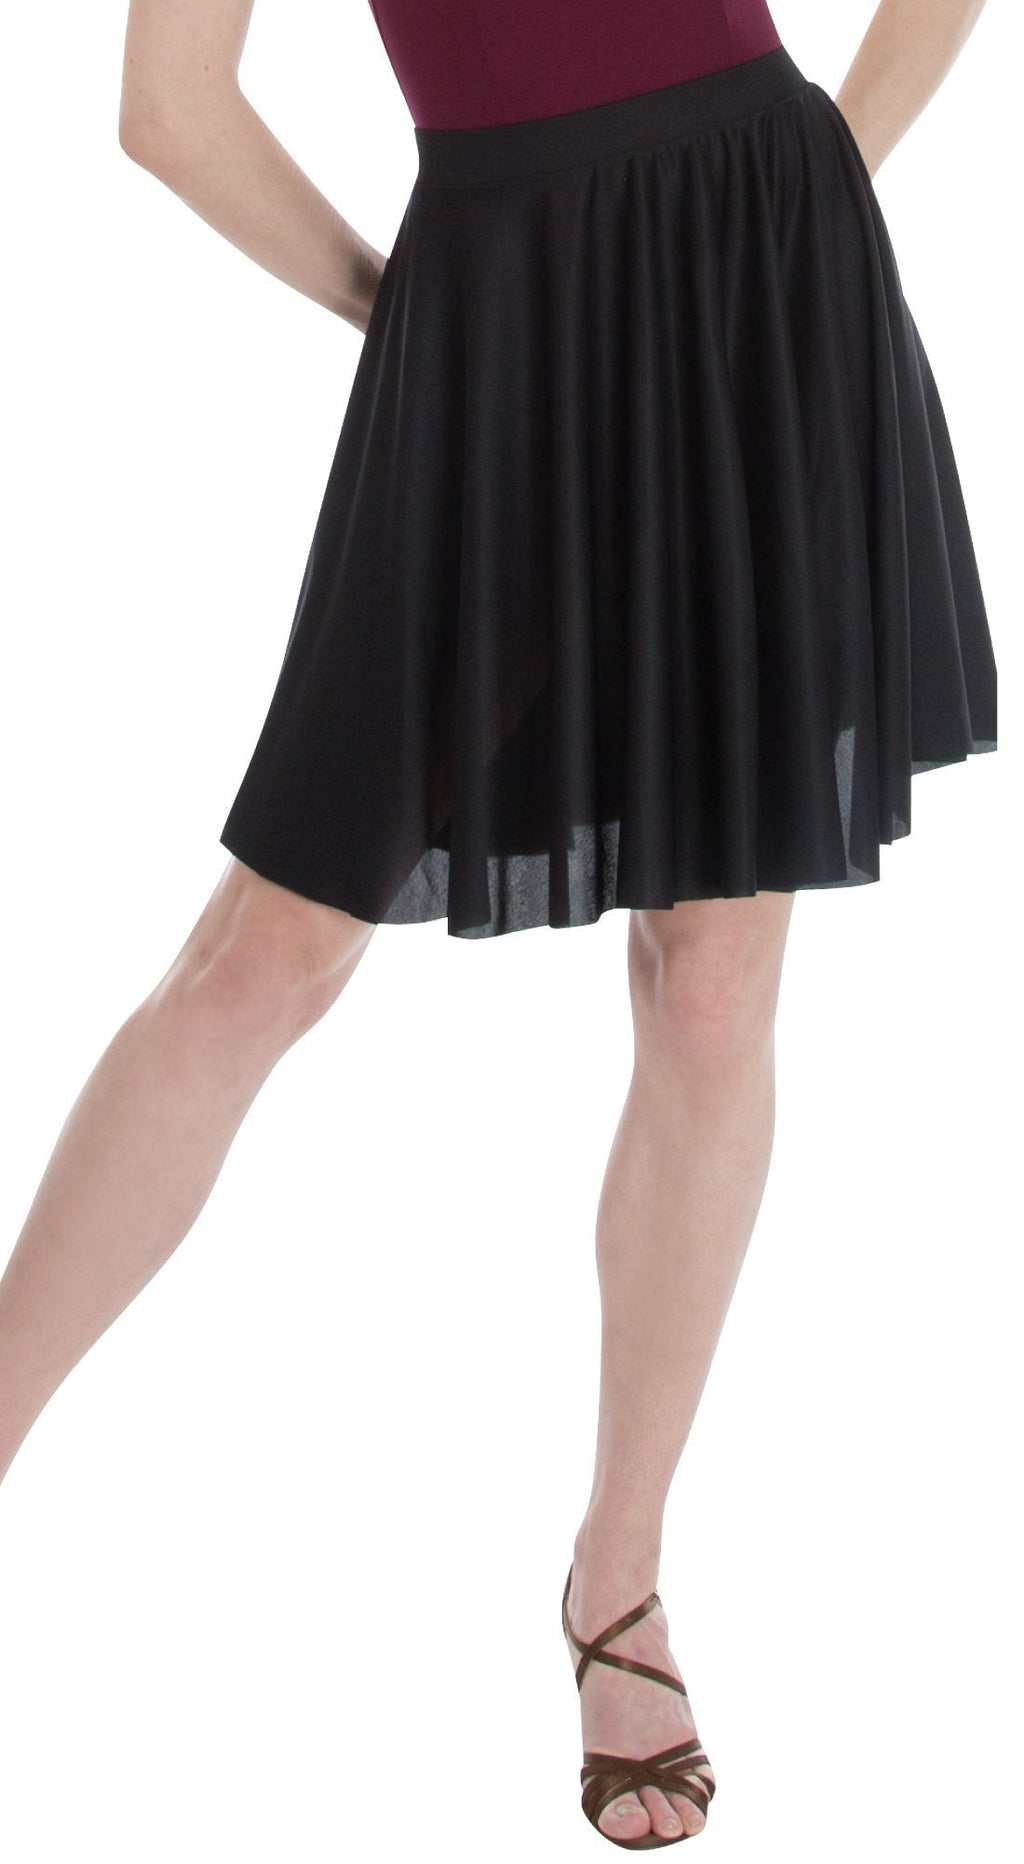 [AUSTRALIA] - Body Wrappers Matte Finish Above-The-Knee Circle Skirt (411) Large Black 